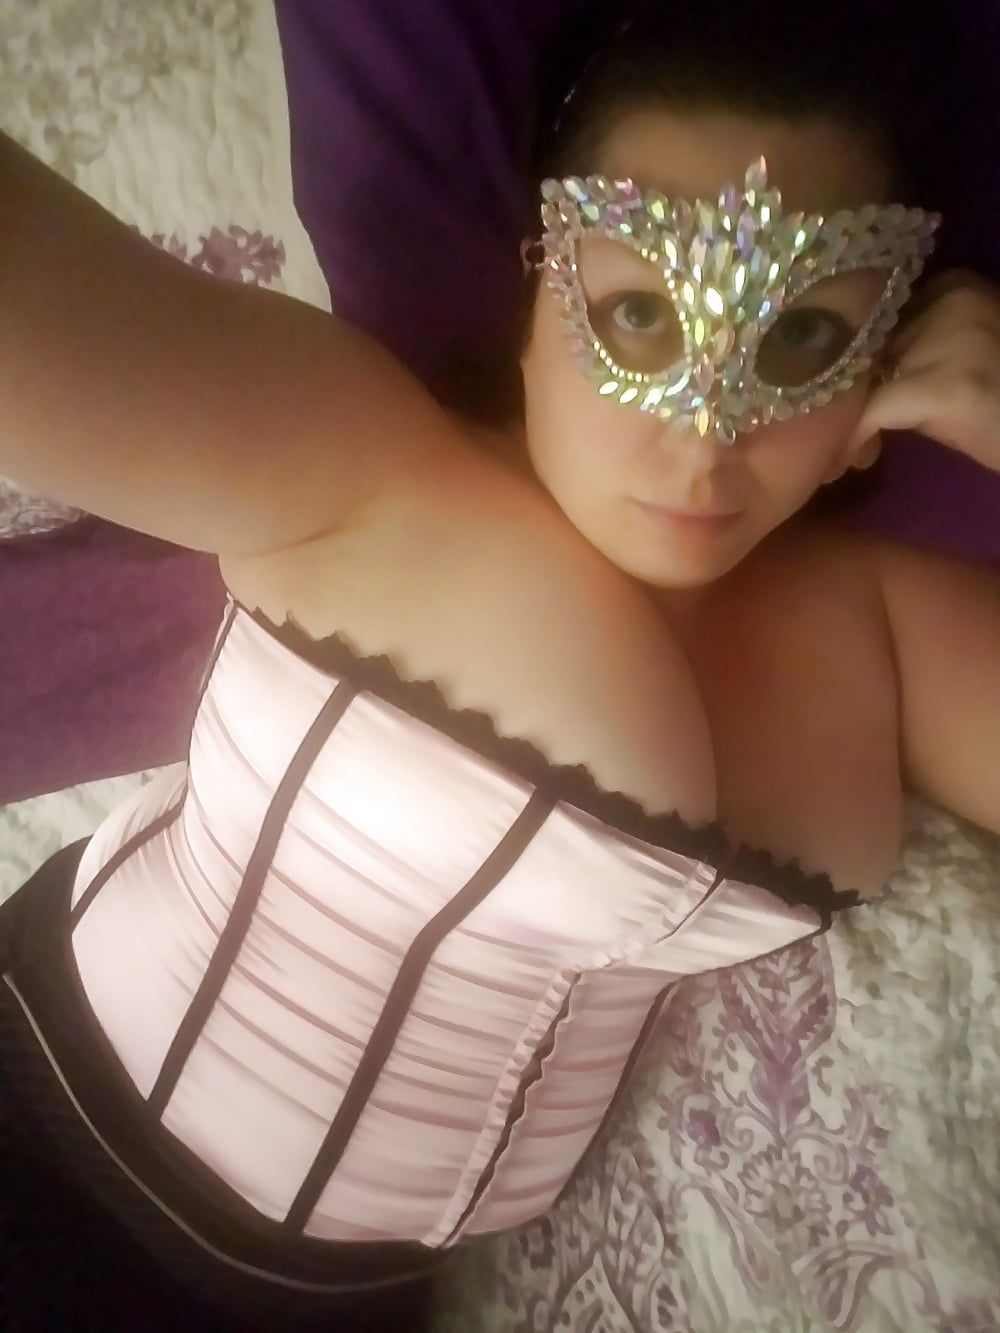 Dainty Pink Corset skirt and heels & favorite crystal mask #35